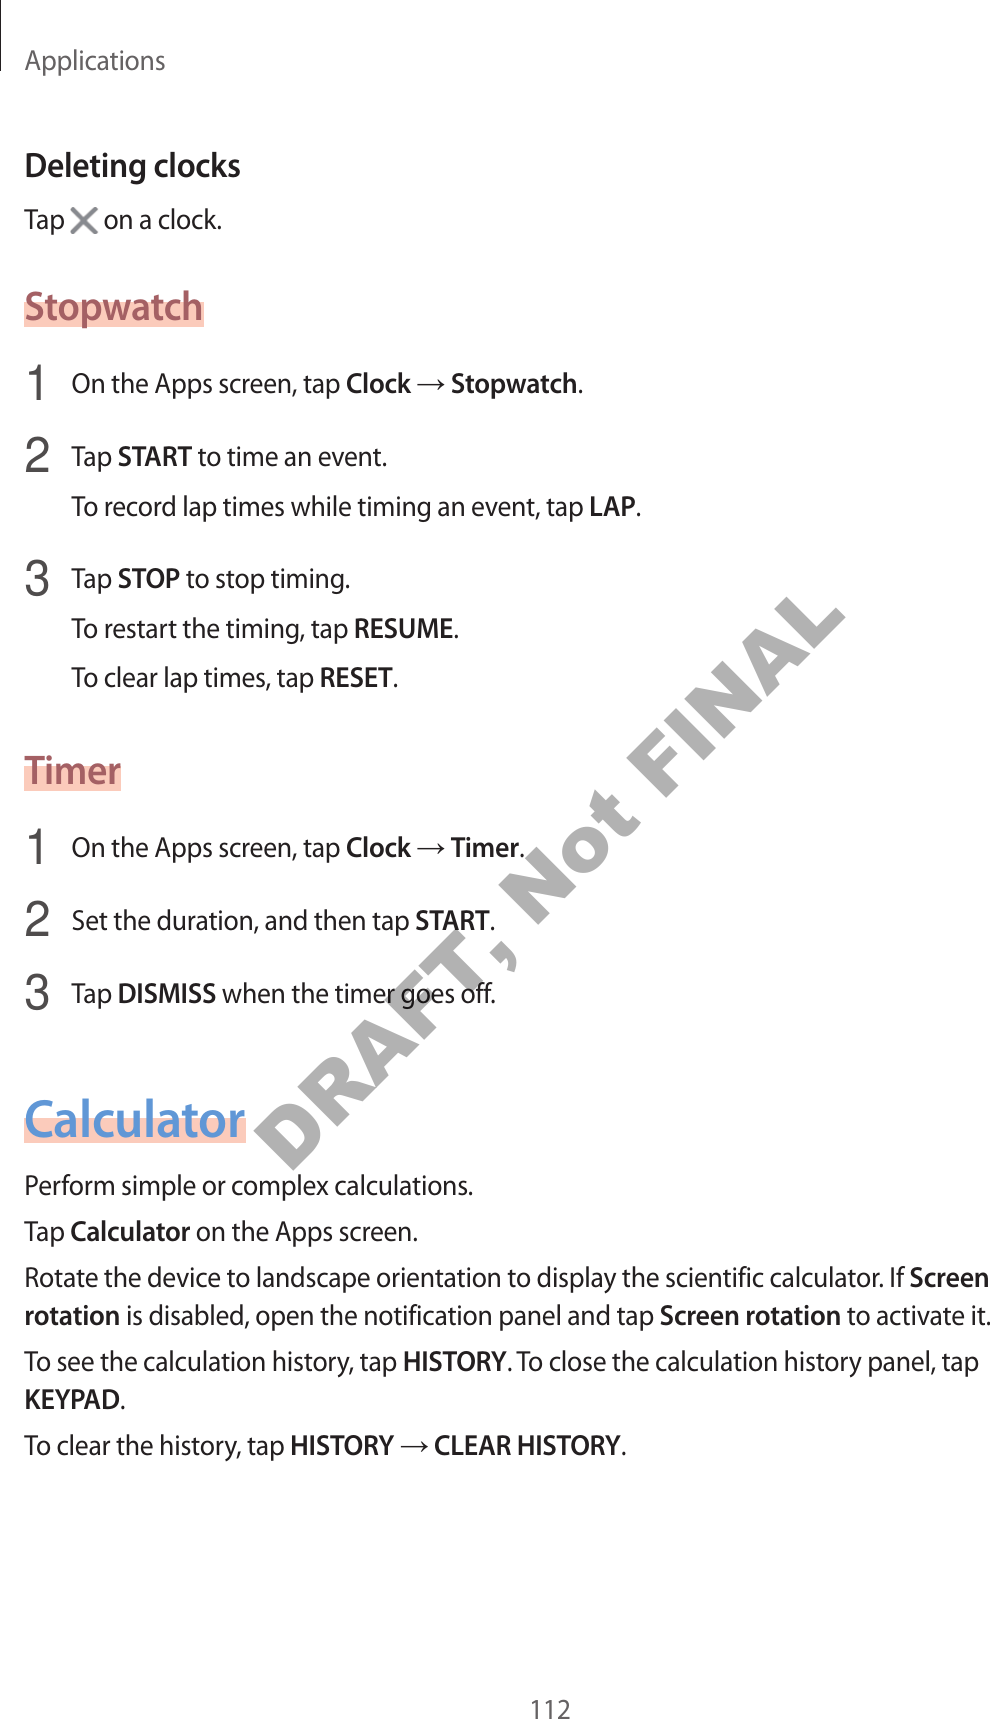 Applications112Deleting clocksTap   on a clock.Stopwatch1  On the Apps screen, tap Clock  Stopwatch.2  Tap START to time an event.To record lap times while timing an event, tap LAP.3  Tap STOP to stop timing.To restart the timing, tap RESUME.To clear lap times, tap RESET.Timer1  On the Apps screen, tap Clock  Timer.2  Set the duration, and then tap START.3  Tap DISMISS when the timer goes off.CalculatorPerform simple or complex calculations.Tap Calculator on the Apps screen.Rotate the device to landscape orientation to display the scientific calculator. If Screen rotation is disabled, open the notification panel and tap Screen rotation to activate it.To see the calculation history, tap HISTORY. To close the calculation history panel, tap KEYPAD.To clear the history, tap HISTORY  CLEAR HISTORY.DRAFT, Not FINAL